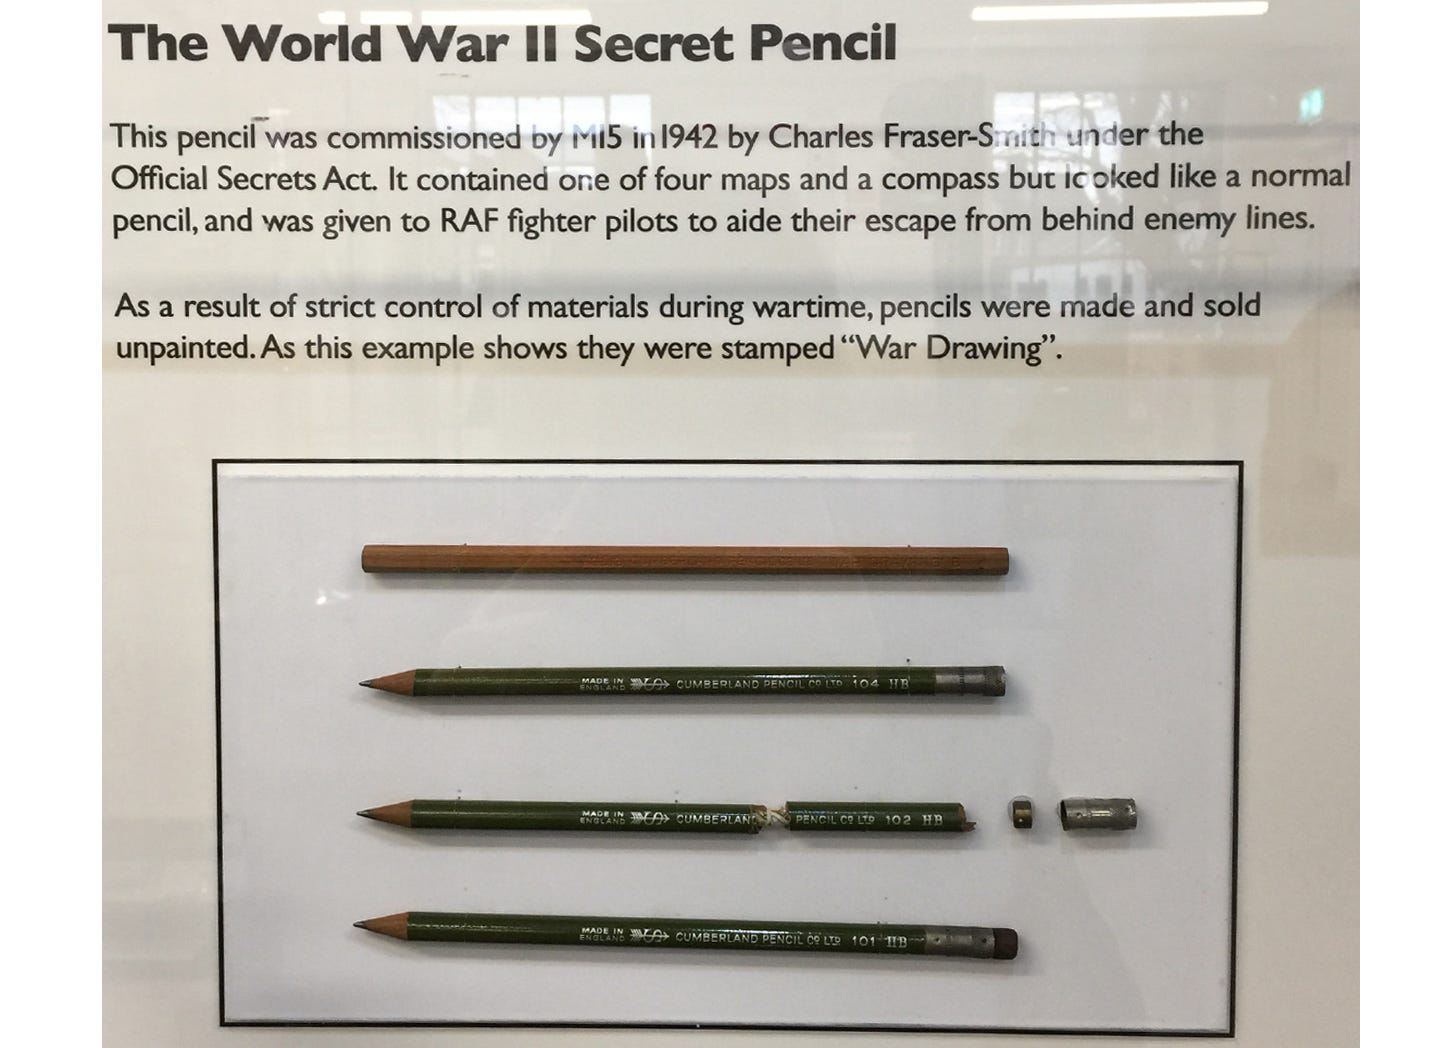 A photograph of a display case at Derwent Pencil Museum, Keswick, UK. The display shows real examples of the secret pencil and briefly explains it's history